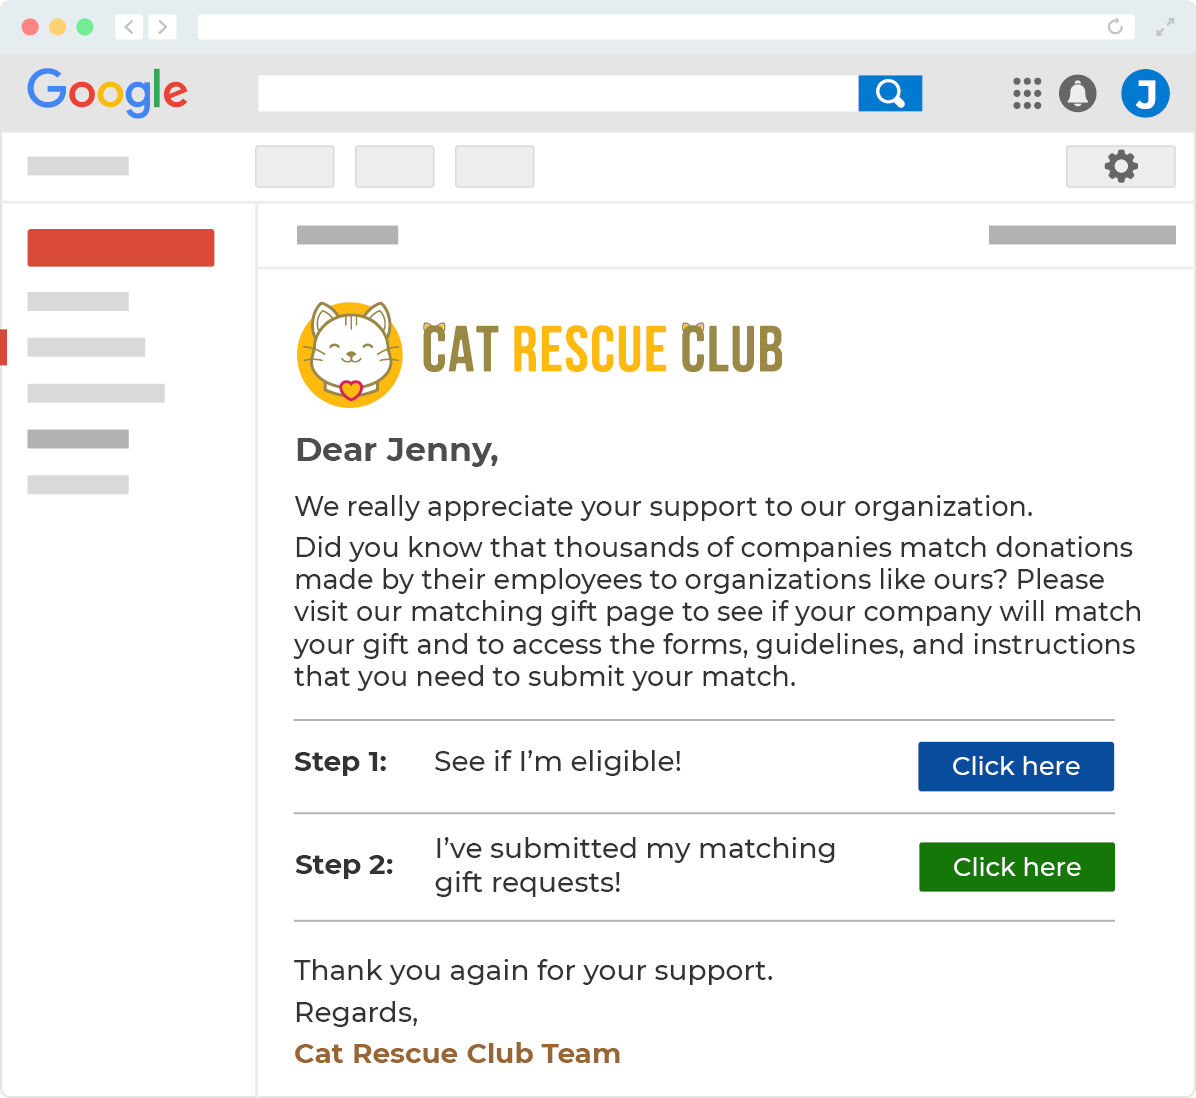 This image shows a mock email from a demo organization called Cat Rescue Club. The email encourages the donor to check to see if they are eligible for a matching gift from their employer.